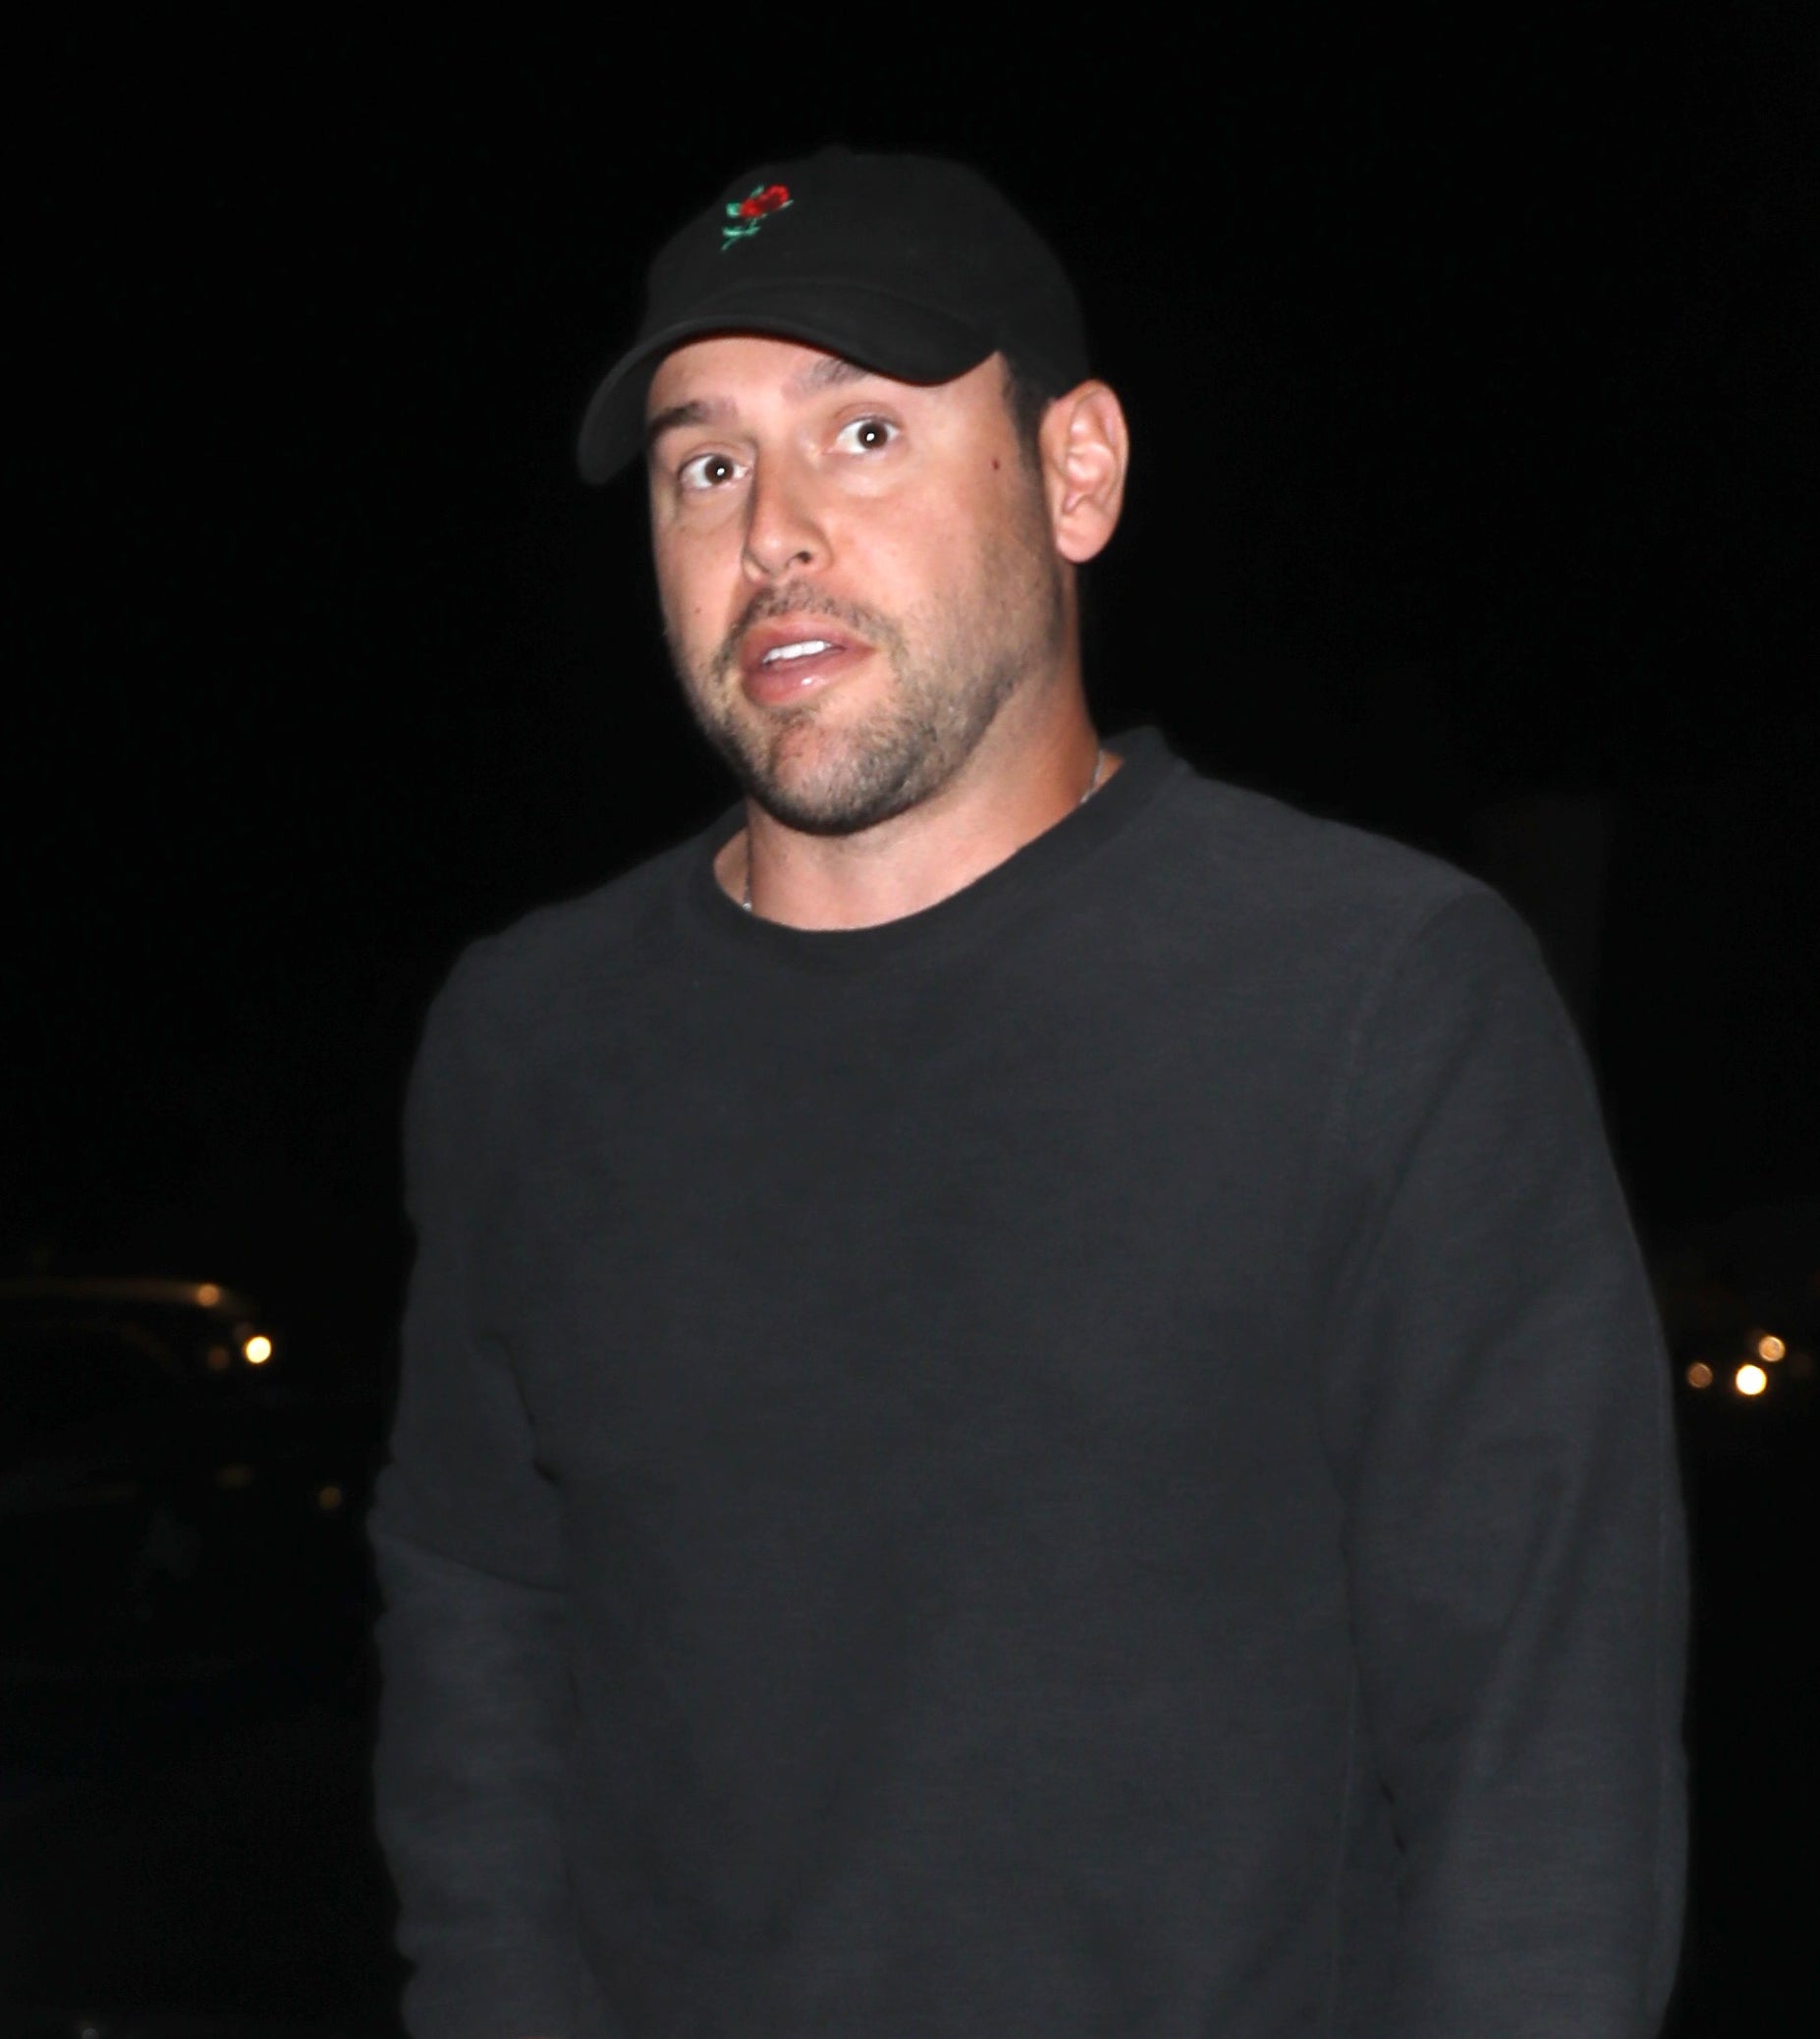 Scooter Braun in a casual sweater and pants walking on a city street at night